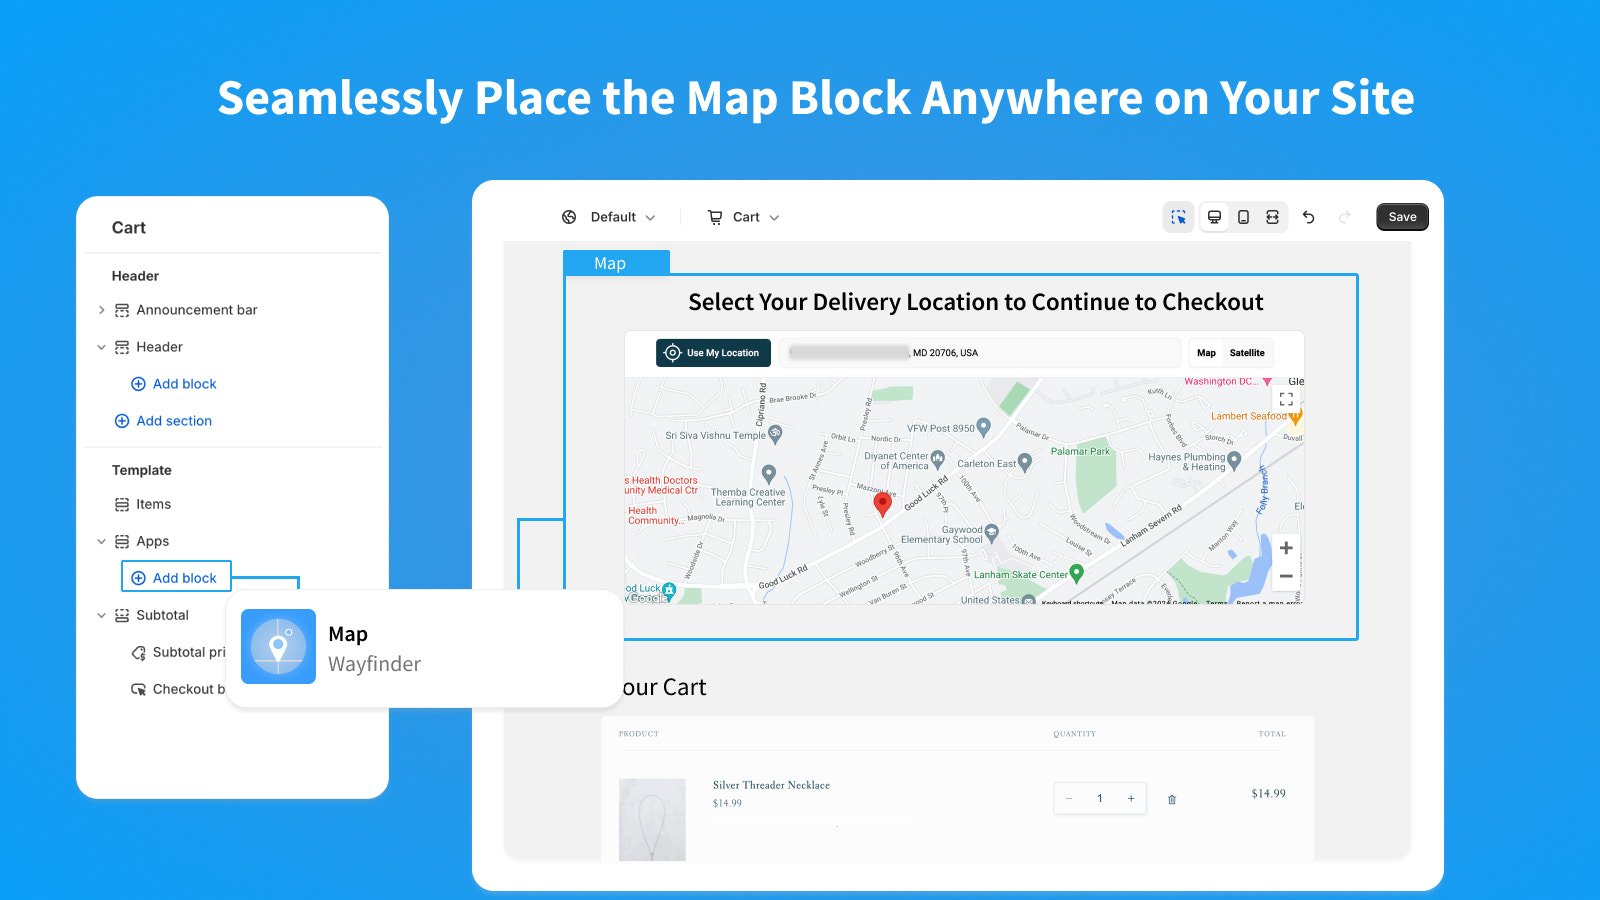 Seamlessly Place the Map Block Anywhere on Your Site